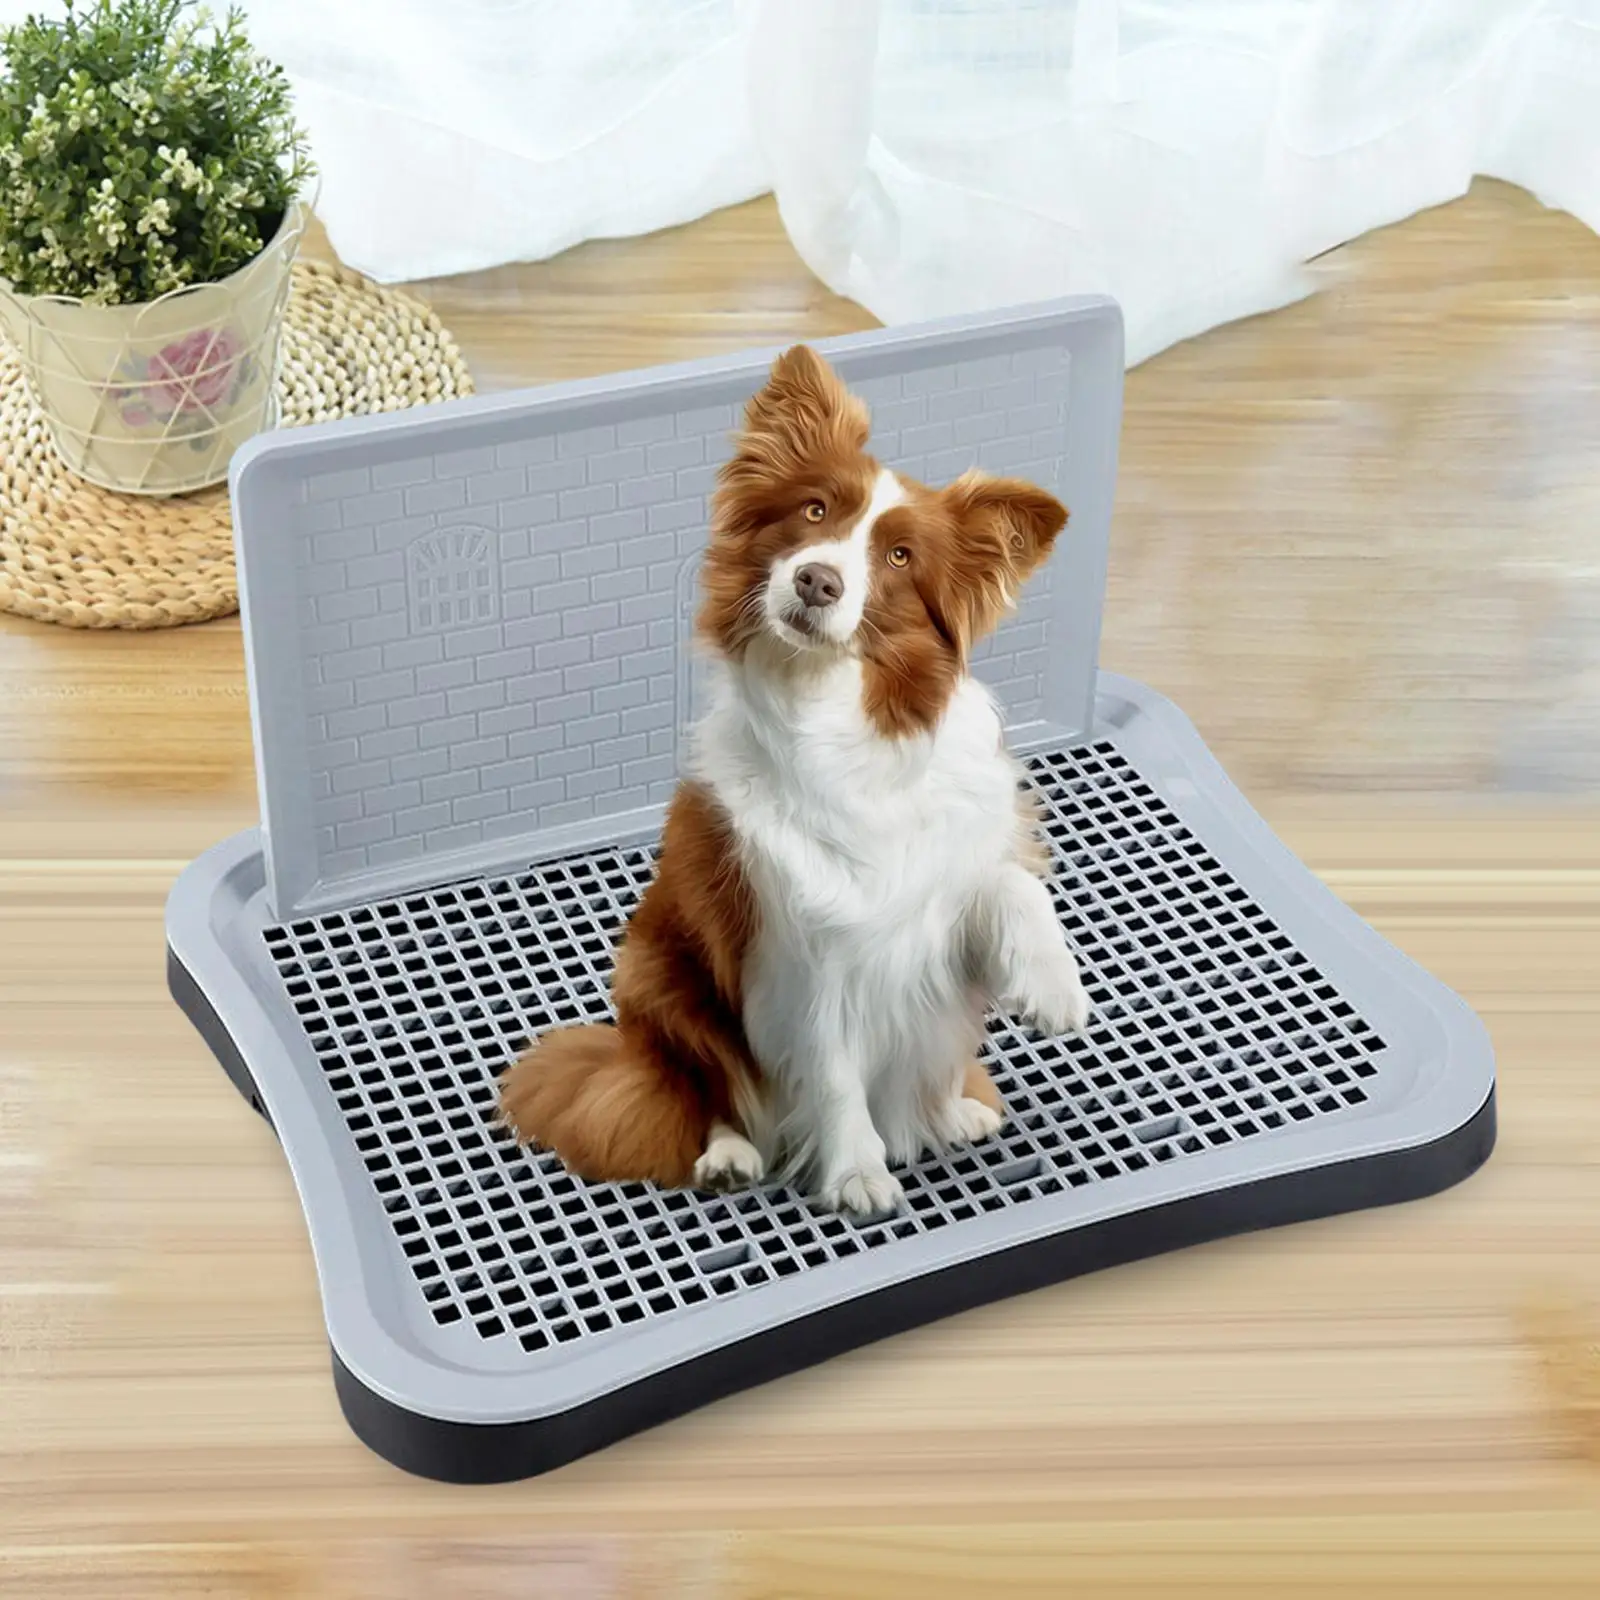 Portable Dog Toilet Potty Trainer Dog Potty Tray with Urinary Column Puppy